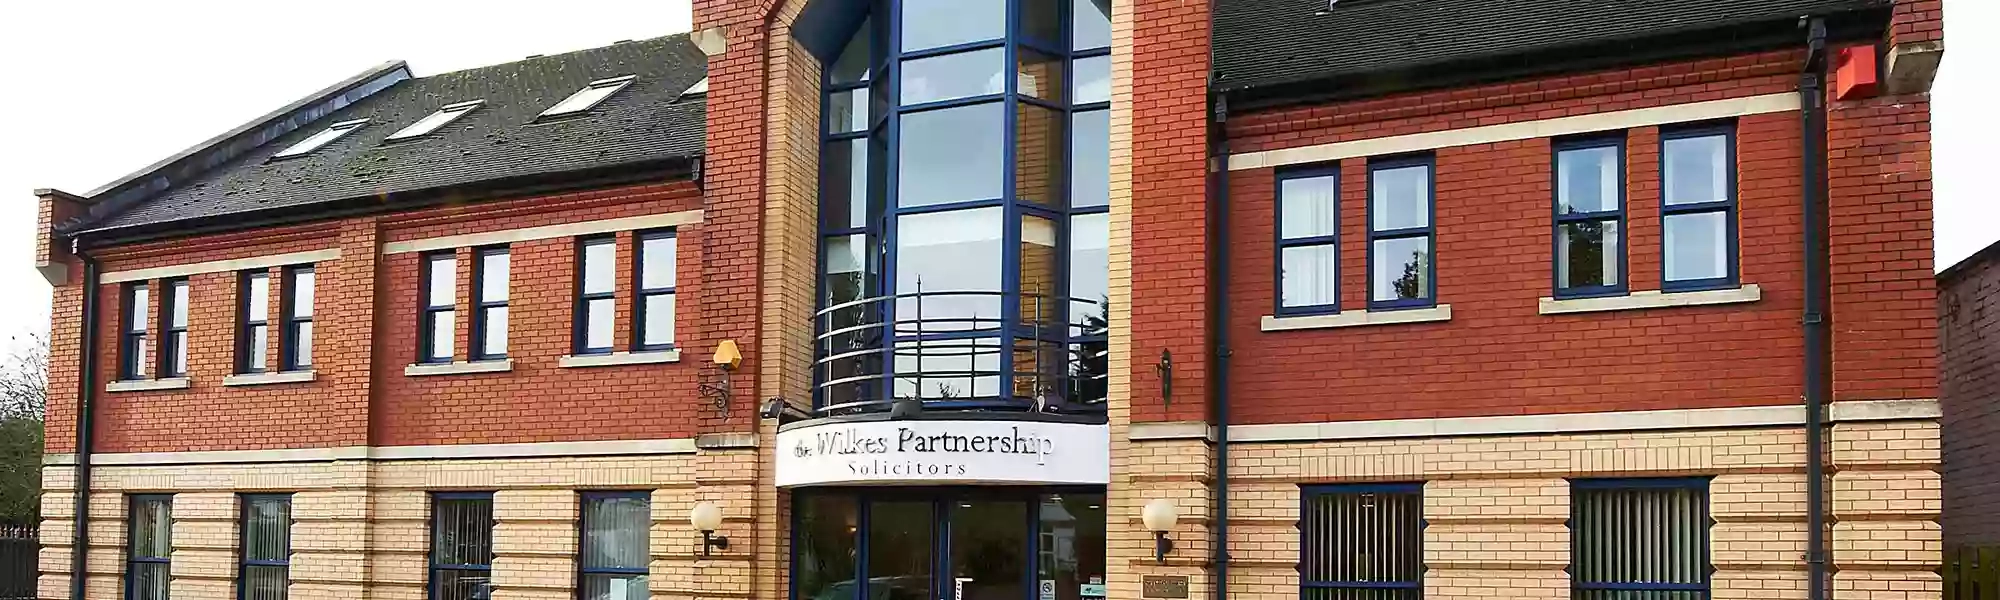 The Wilkes Partnership Solicitors